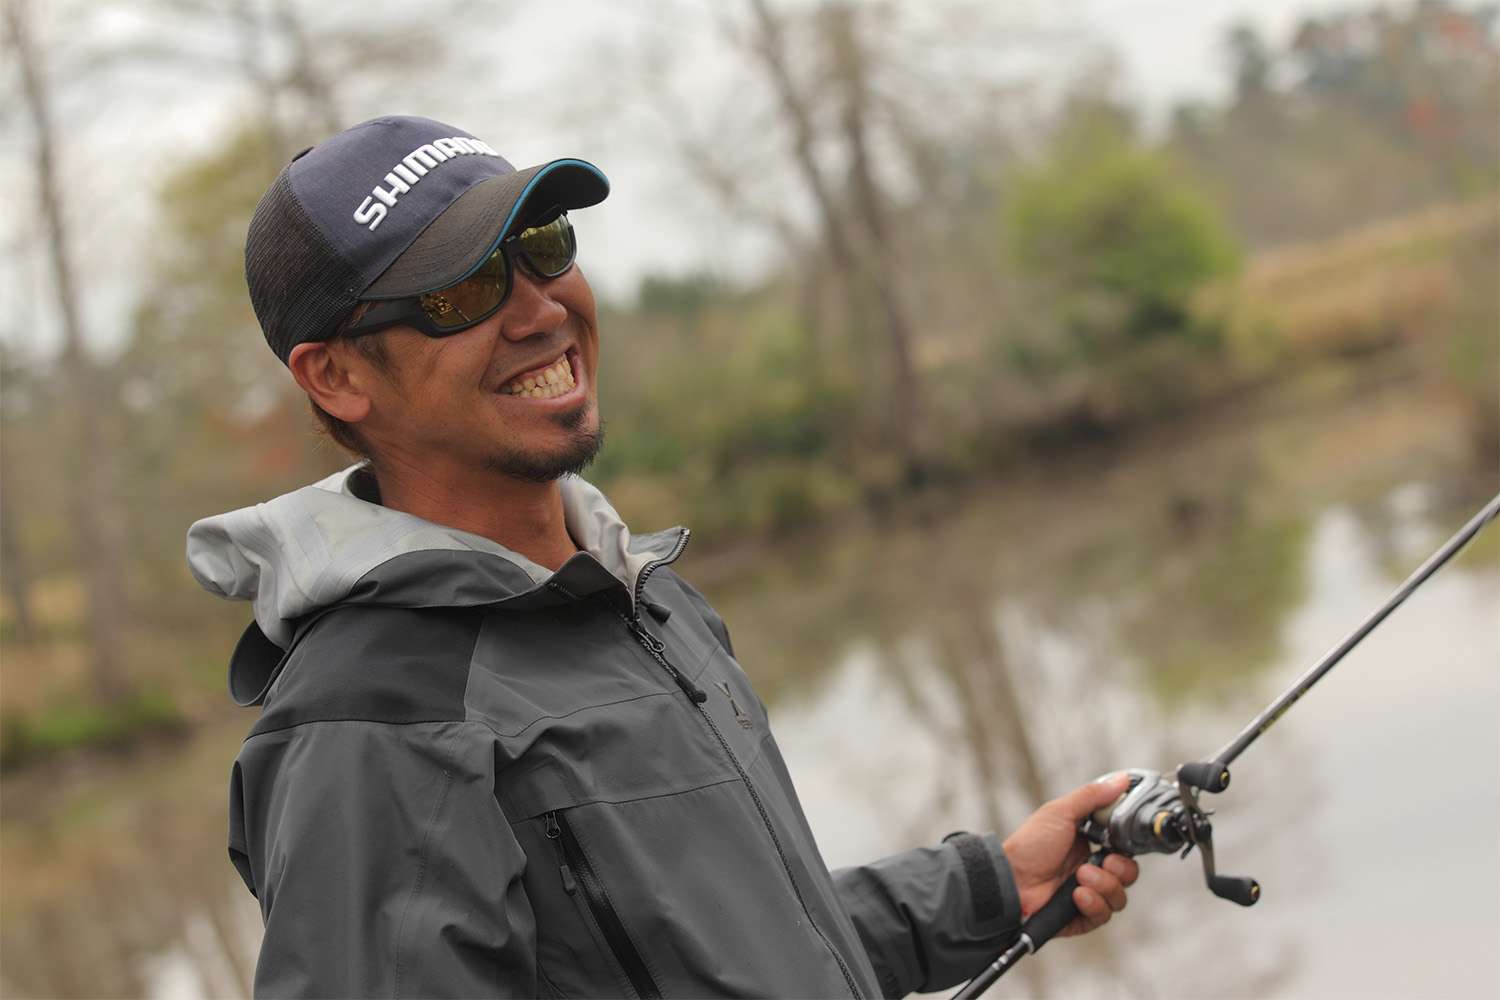 Iyobe said he is just happy to be a part of the Bassmaster Elite Series this year. He is enjoying every moment of his journey.